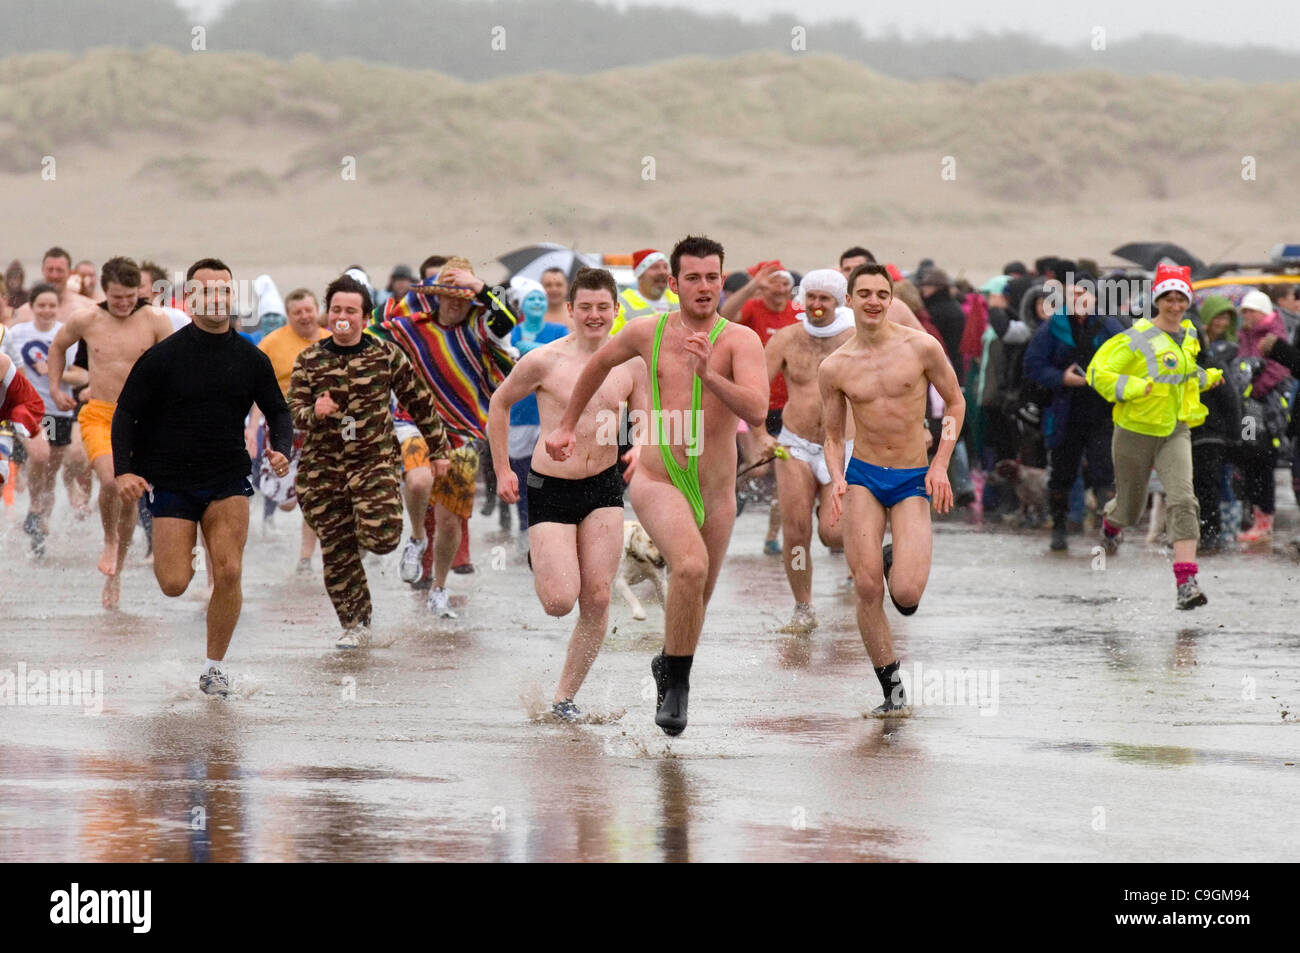 Pembrey, Llanelli, UK. 26th Dec, 2011. Swimmers racing into the sea at the annual Boxing Day 'Walrus Dip' at Cefn Sidn beach in Pembrey near Llanelli today. The leading runner at the front is wearing a mankini. Stock Photo